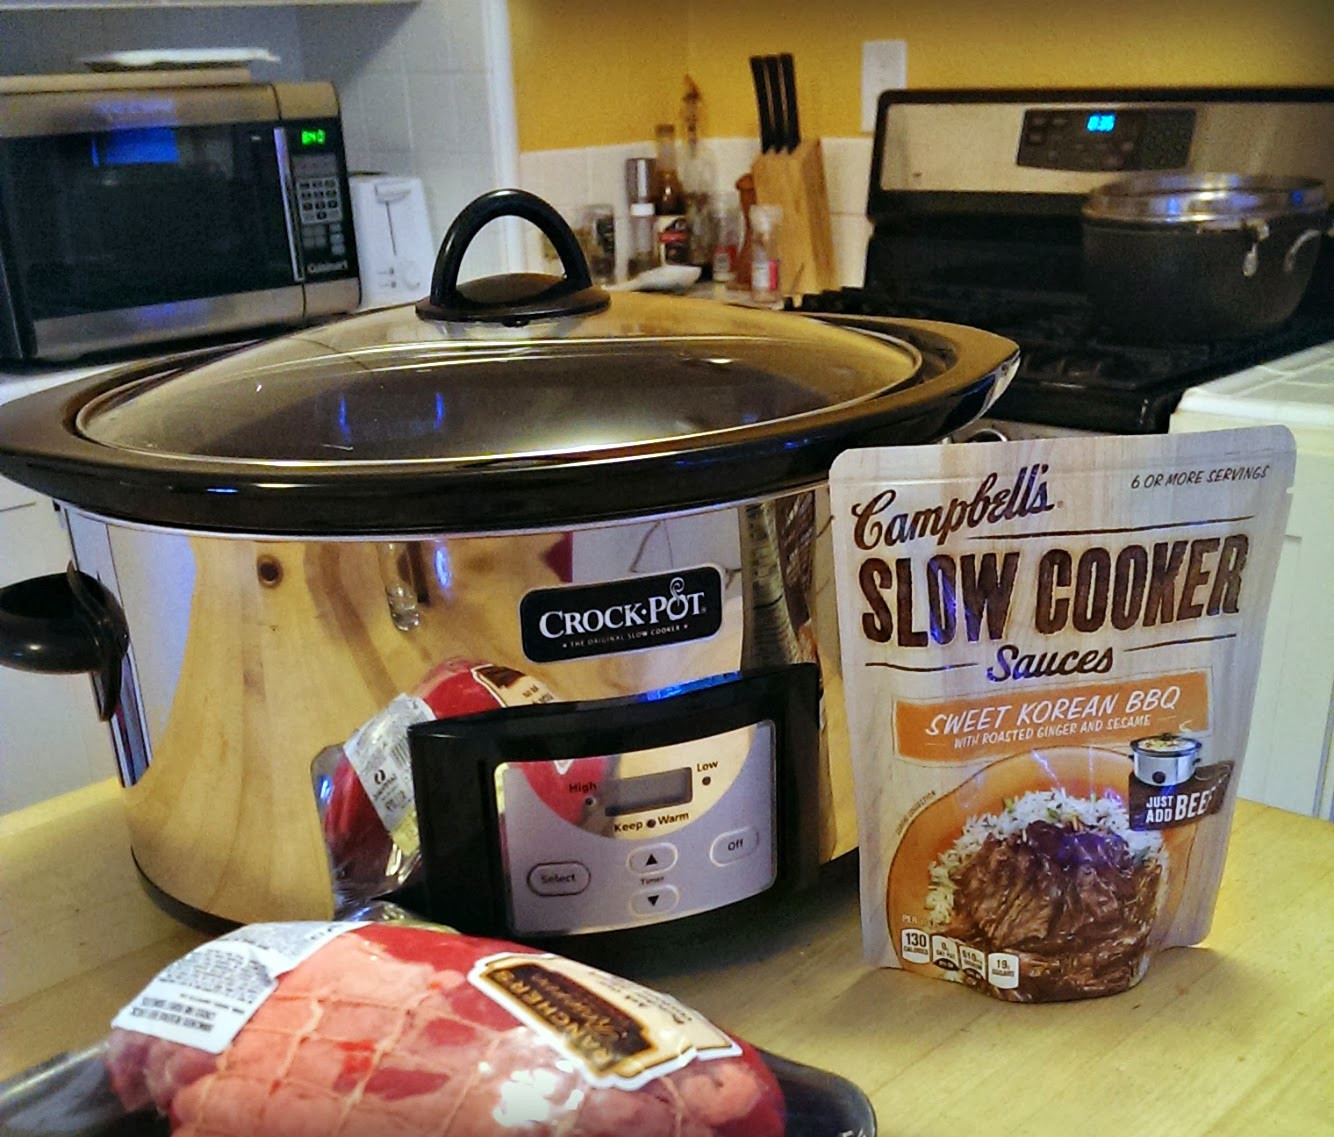 Campbell'S Slow Cooker Sauces
 Bonggamom Finds Campbell s Slow Cooker Sauces review and